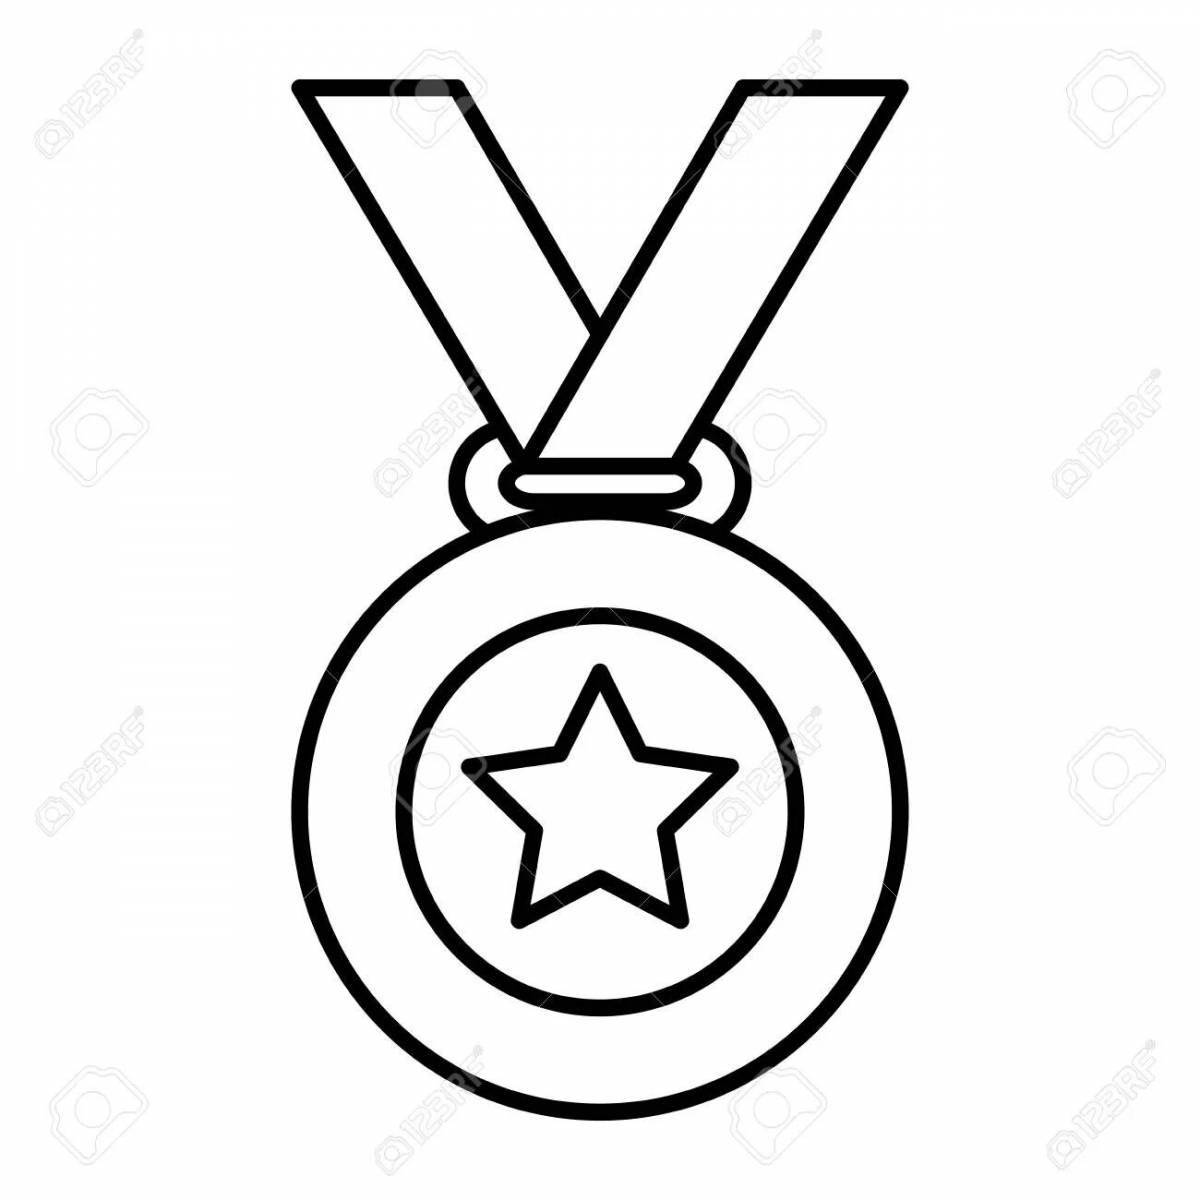 Bright medal February 23 coloring